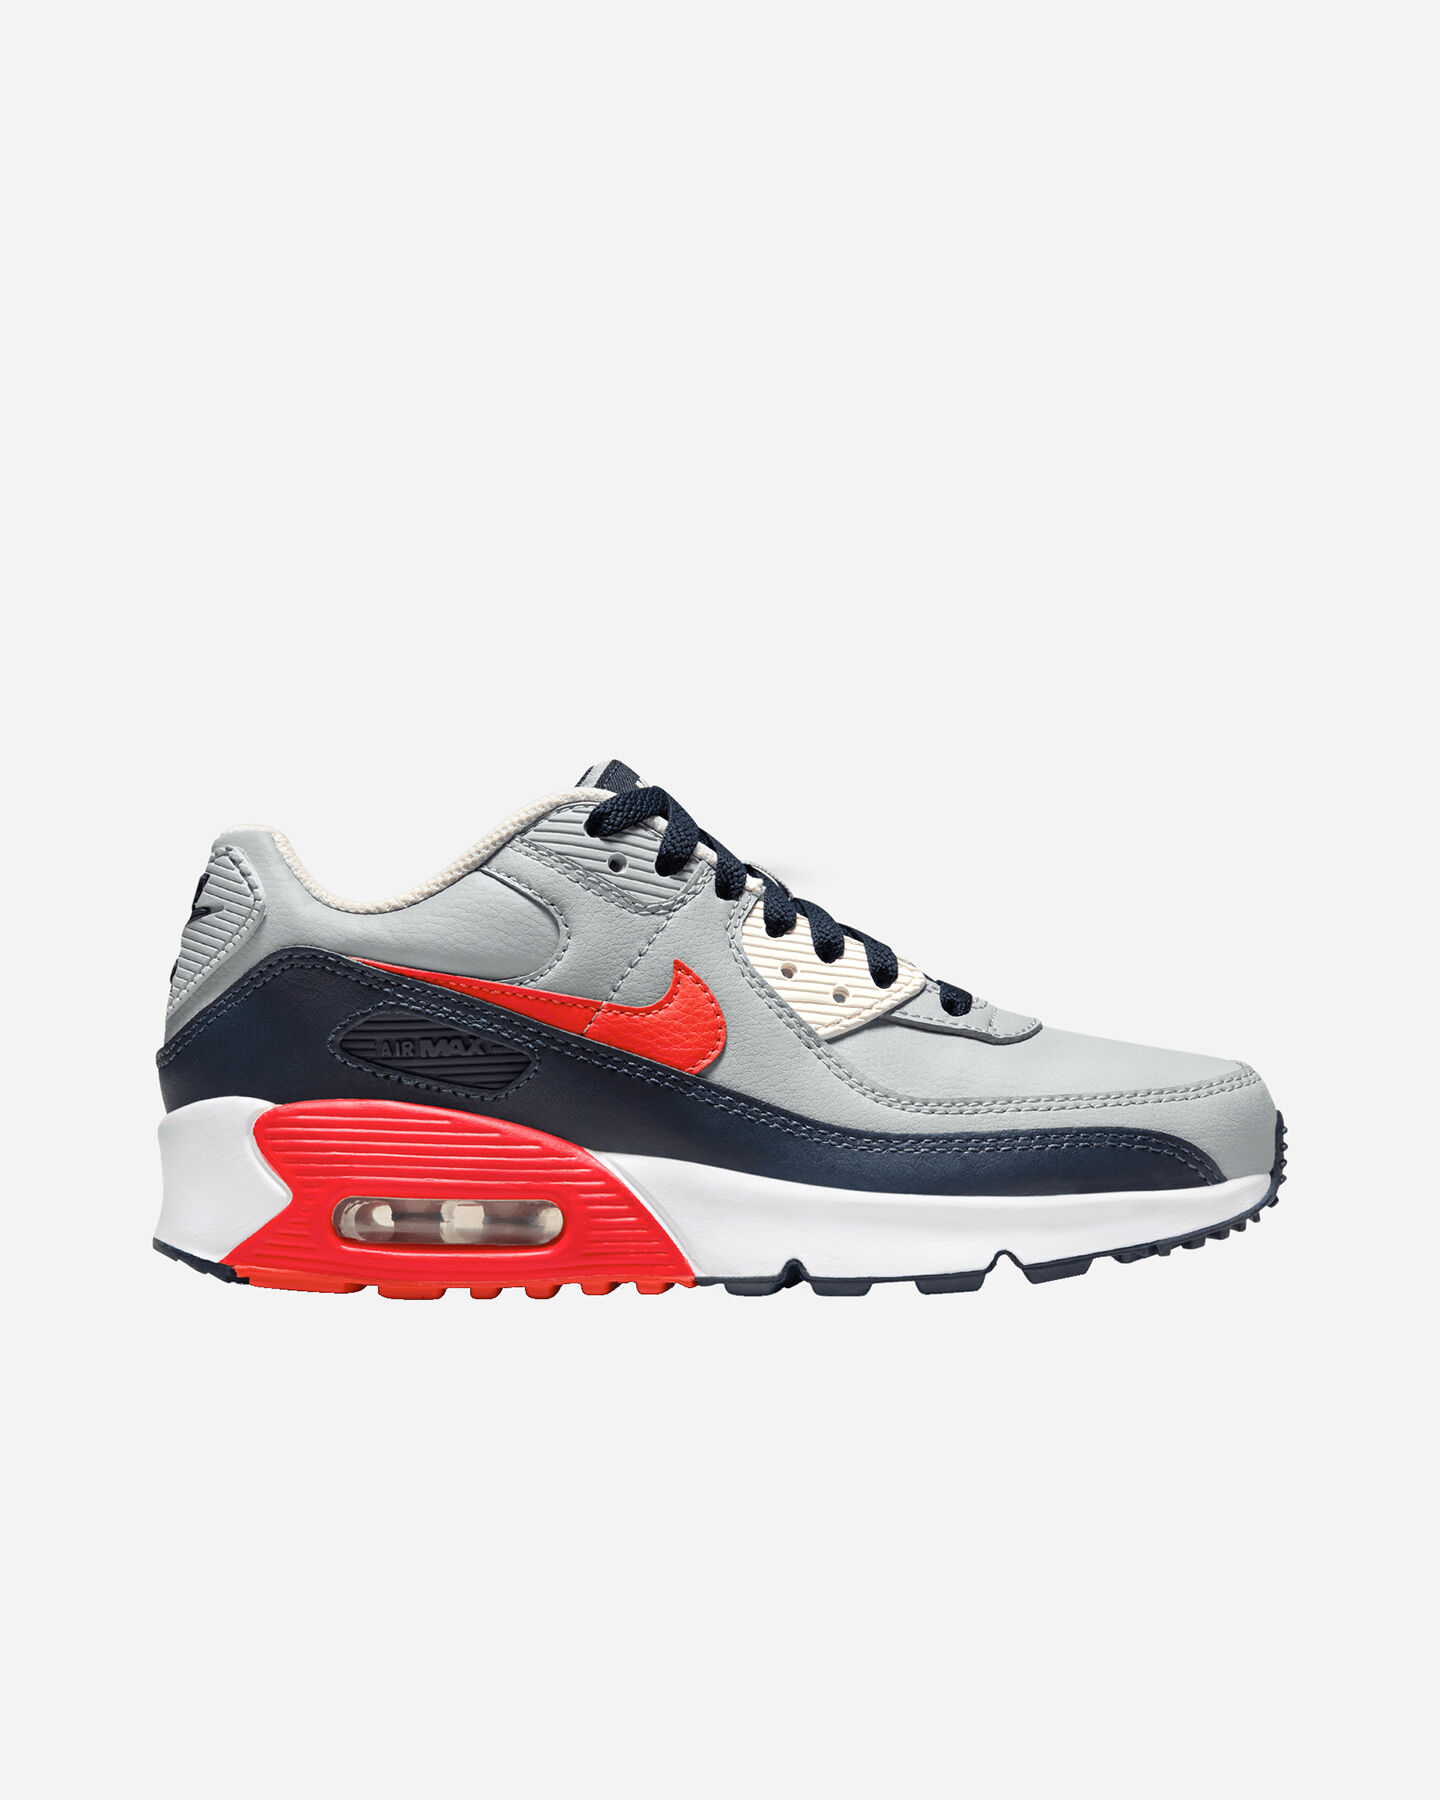  Scarpe sneakers NIKE AIR MAX 90 LTR GS JR S5619703|021|4Y scatto 0